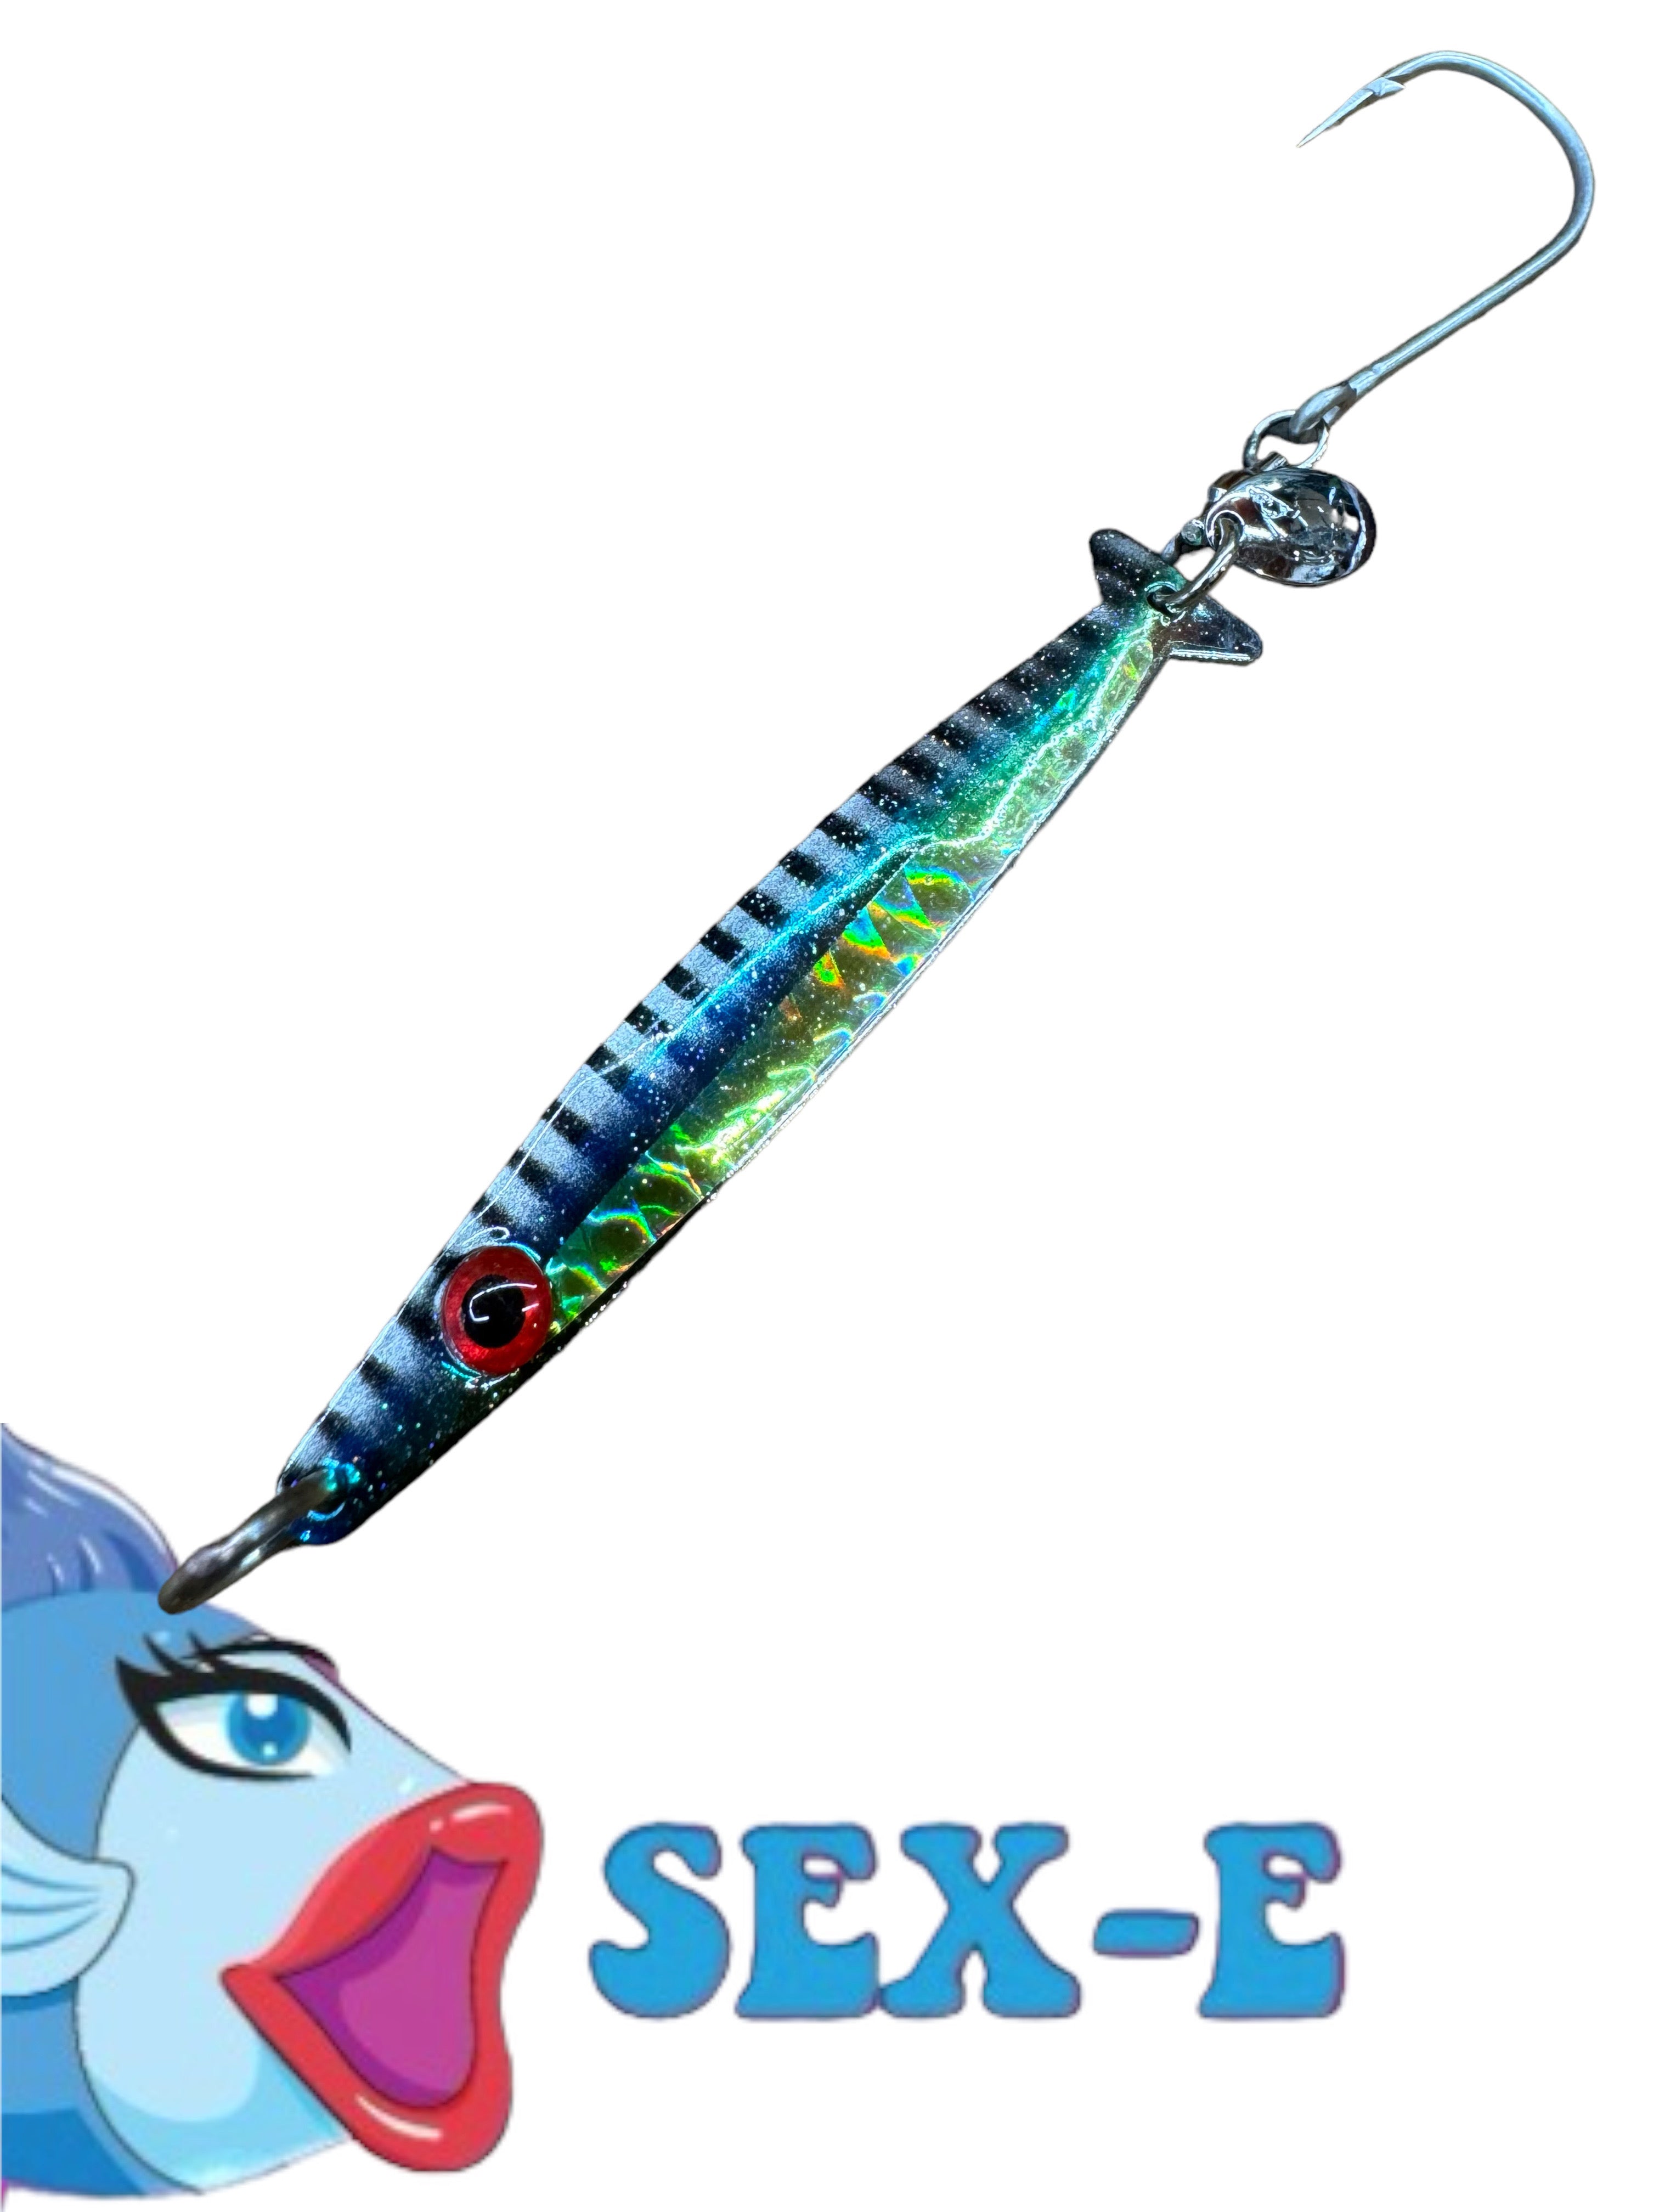 Trolling Lures, High-Quality Products